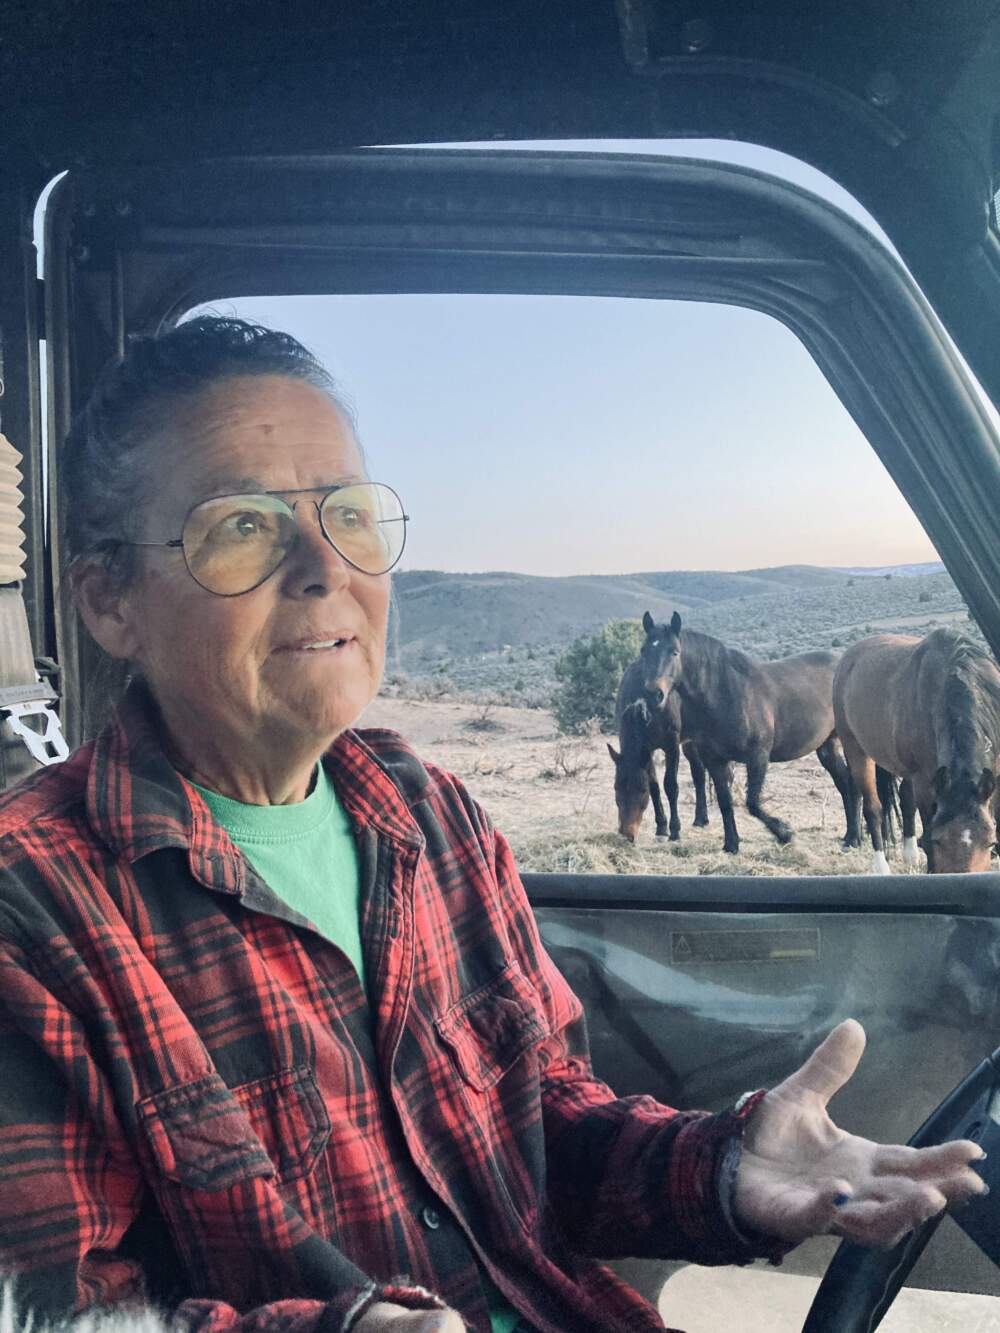 Shannon Windle is the president of the Hidden Valley Wild Horse Protection Fund in Reno, Nevada. The group opposes wild horse round-ups and operates a horse sanctuary. (Courtesy of Ashley Ahearn)